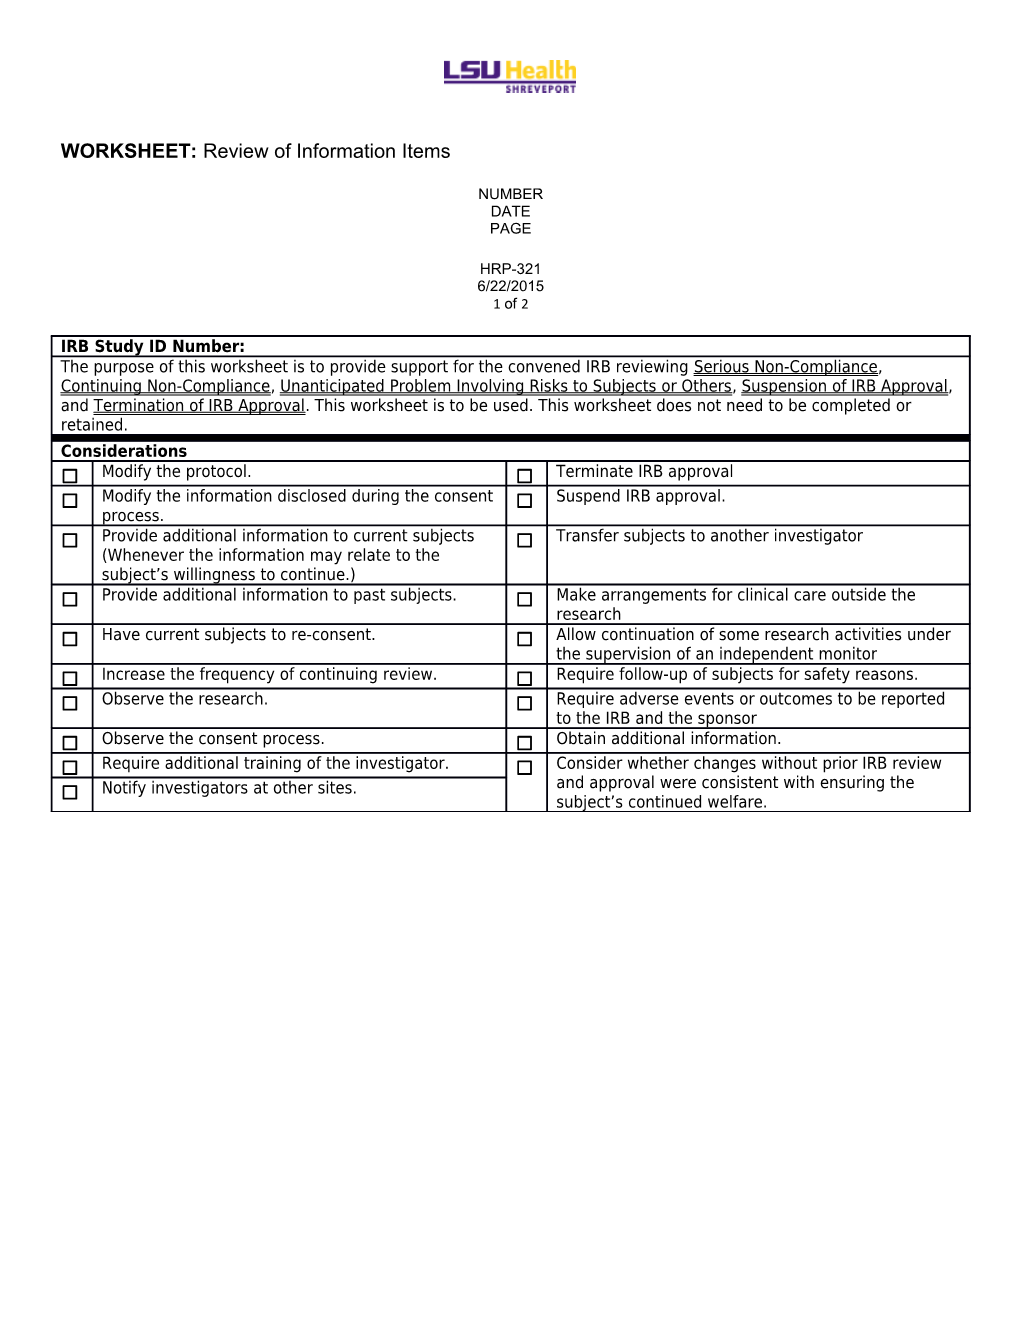 WORKSHEET: Review of Information Items